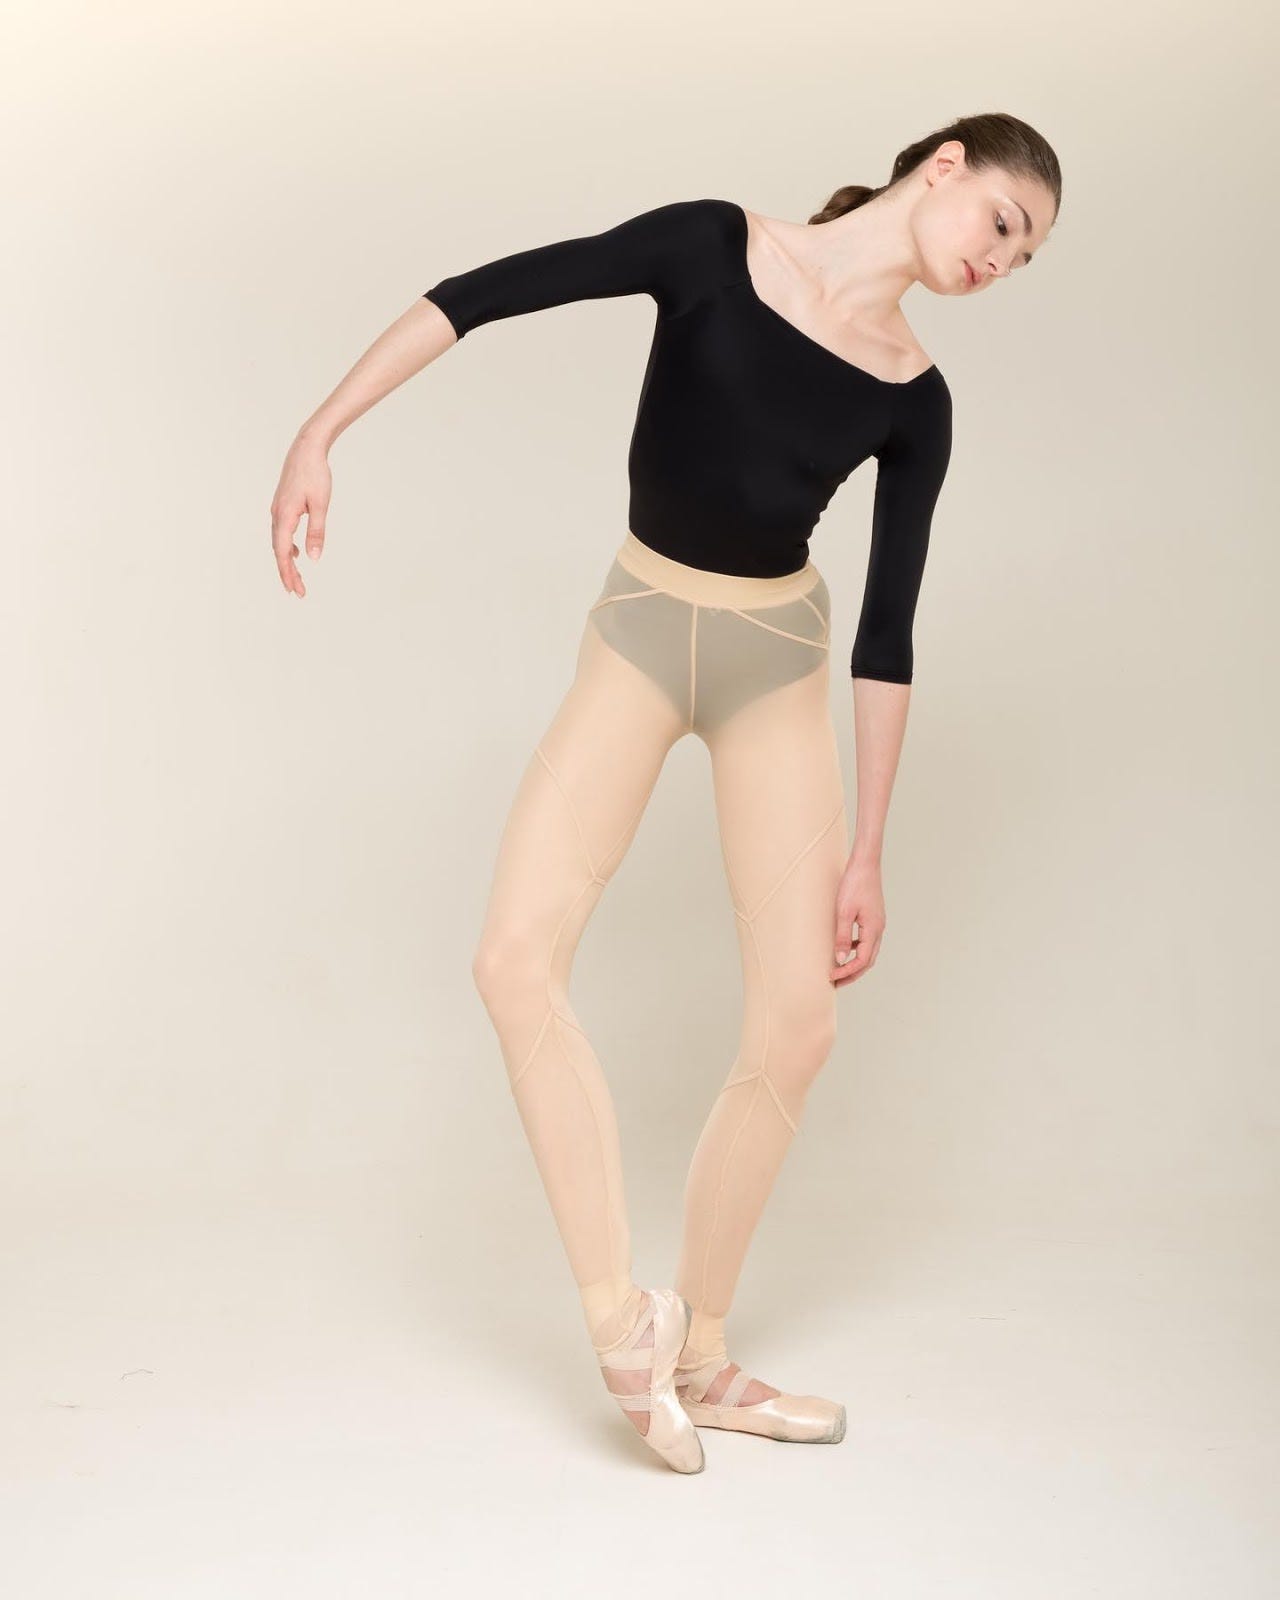 tights over leotard all day every day #fyp #ballerina #dancer